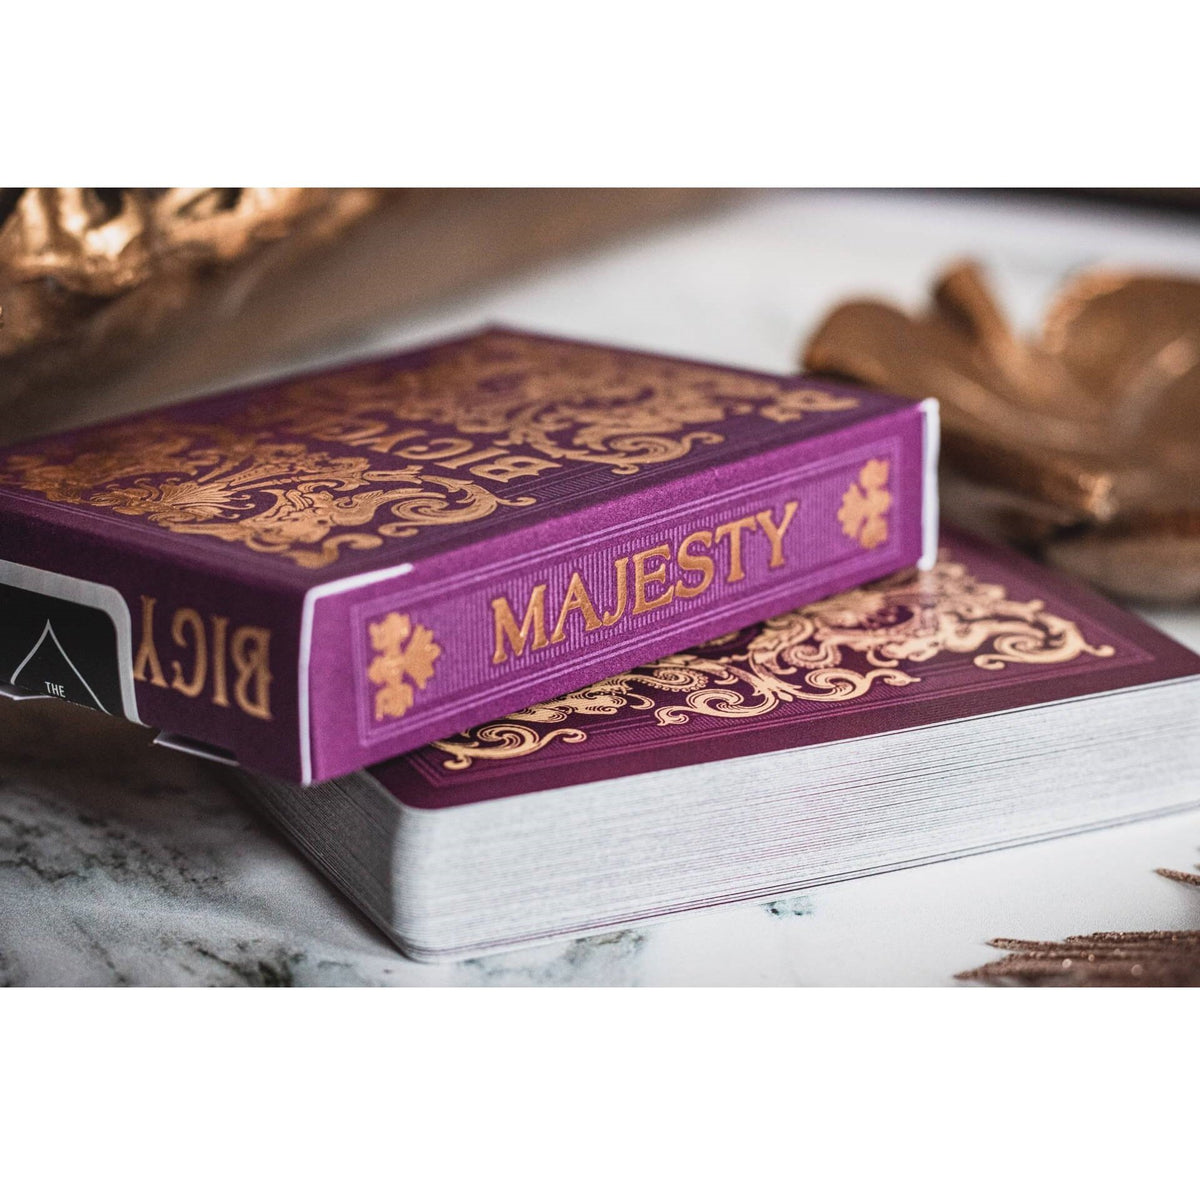 Bicycle Majesty Playing Cards-United States Playing Cards Company-Ace Cards &amp; Collectibles